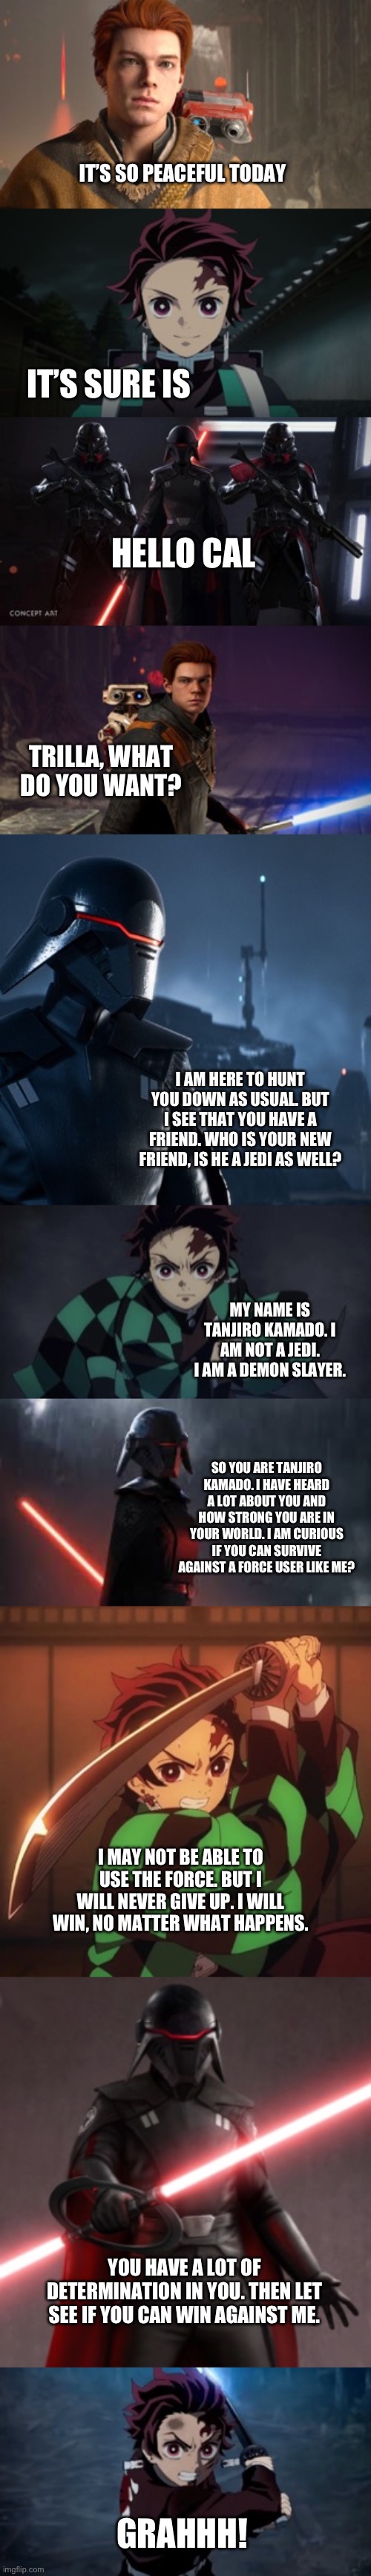 Tanjiro Kamado meet The Second Sister/Trilla Suduri | IT’S SO PEACEFUL TODAY; IT’S SURE IS; HELLO CAL; TRILLA, WHAT DO YOU WANT? I AM HERE TO HUNT YOU DOWN AS USUAL. BUT I SEE THAT YOU HAVE A FRIEND. WHO IS YOUR NEW FRIEND, IS HE A JEDI AS WELL? MY NAME IS TANJIRO KAMADO. I AM NOT A JEDI. I AM A DEMON SLAYER. SO YOU ARE TANJIRO KAMADO. I HAVE HEARD A LOT ABOUT YOU AND HOW STRONG YOU ARE IN YOUR WORLD. I AM CURIOUS IF YOU CAN SURVIVE AGAINST A FORCE USER LIKE ME? I MAY NOT BE ABLE TO USE THE FORCE. BUT I WILL NEVER GIVE UP. I WILL WIN, NO MATTER WHAT HAPPENS. YOU HAVE A LOT OF DETERMINATION IN YOU. THEN LET SEE IF YOU CAN WIN AGAINST ME. GRAHHH! | image tagged in demon slayer,star wars | made w/ Imgflip meme maker